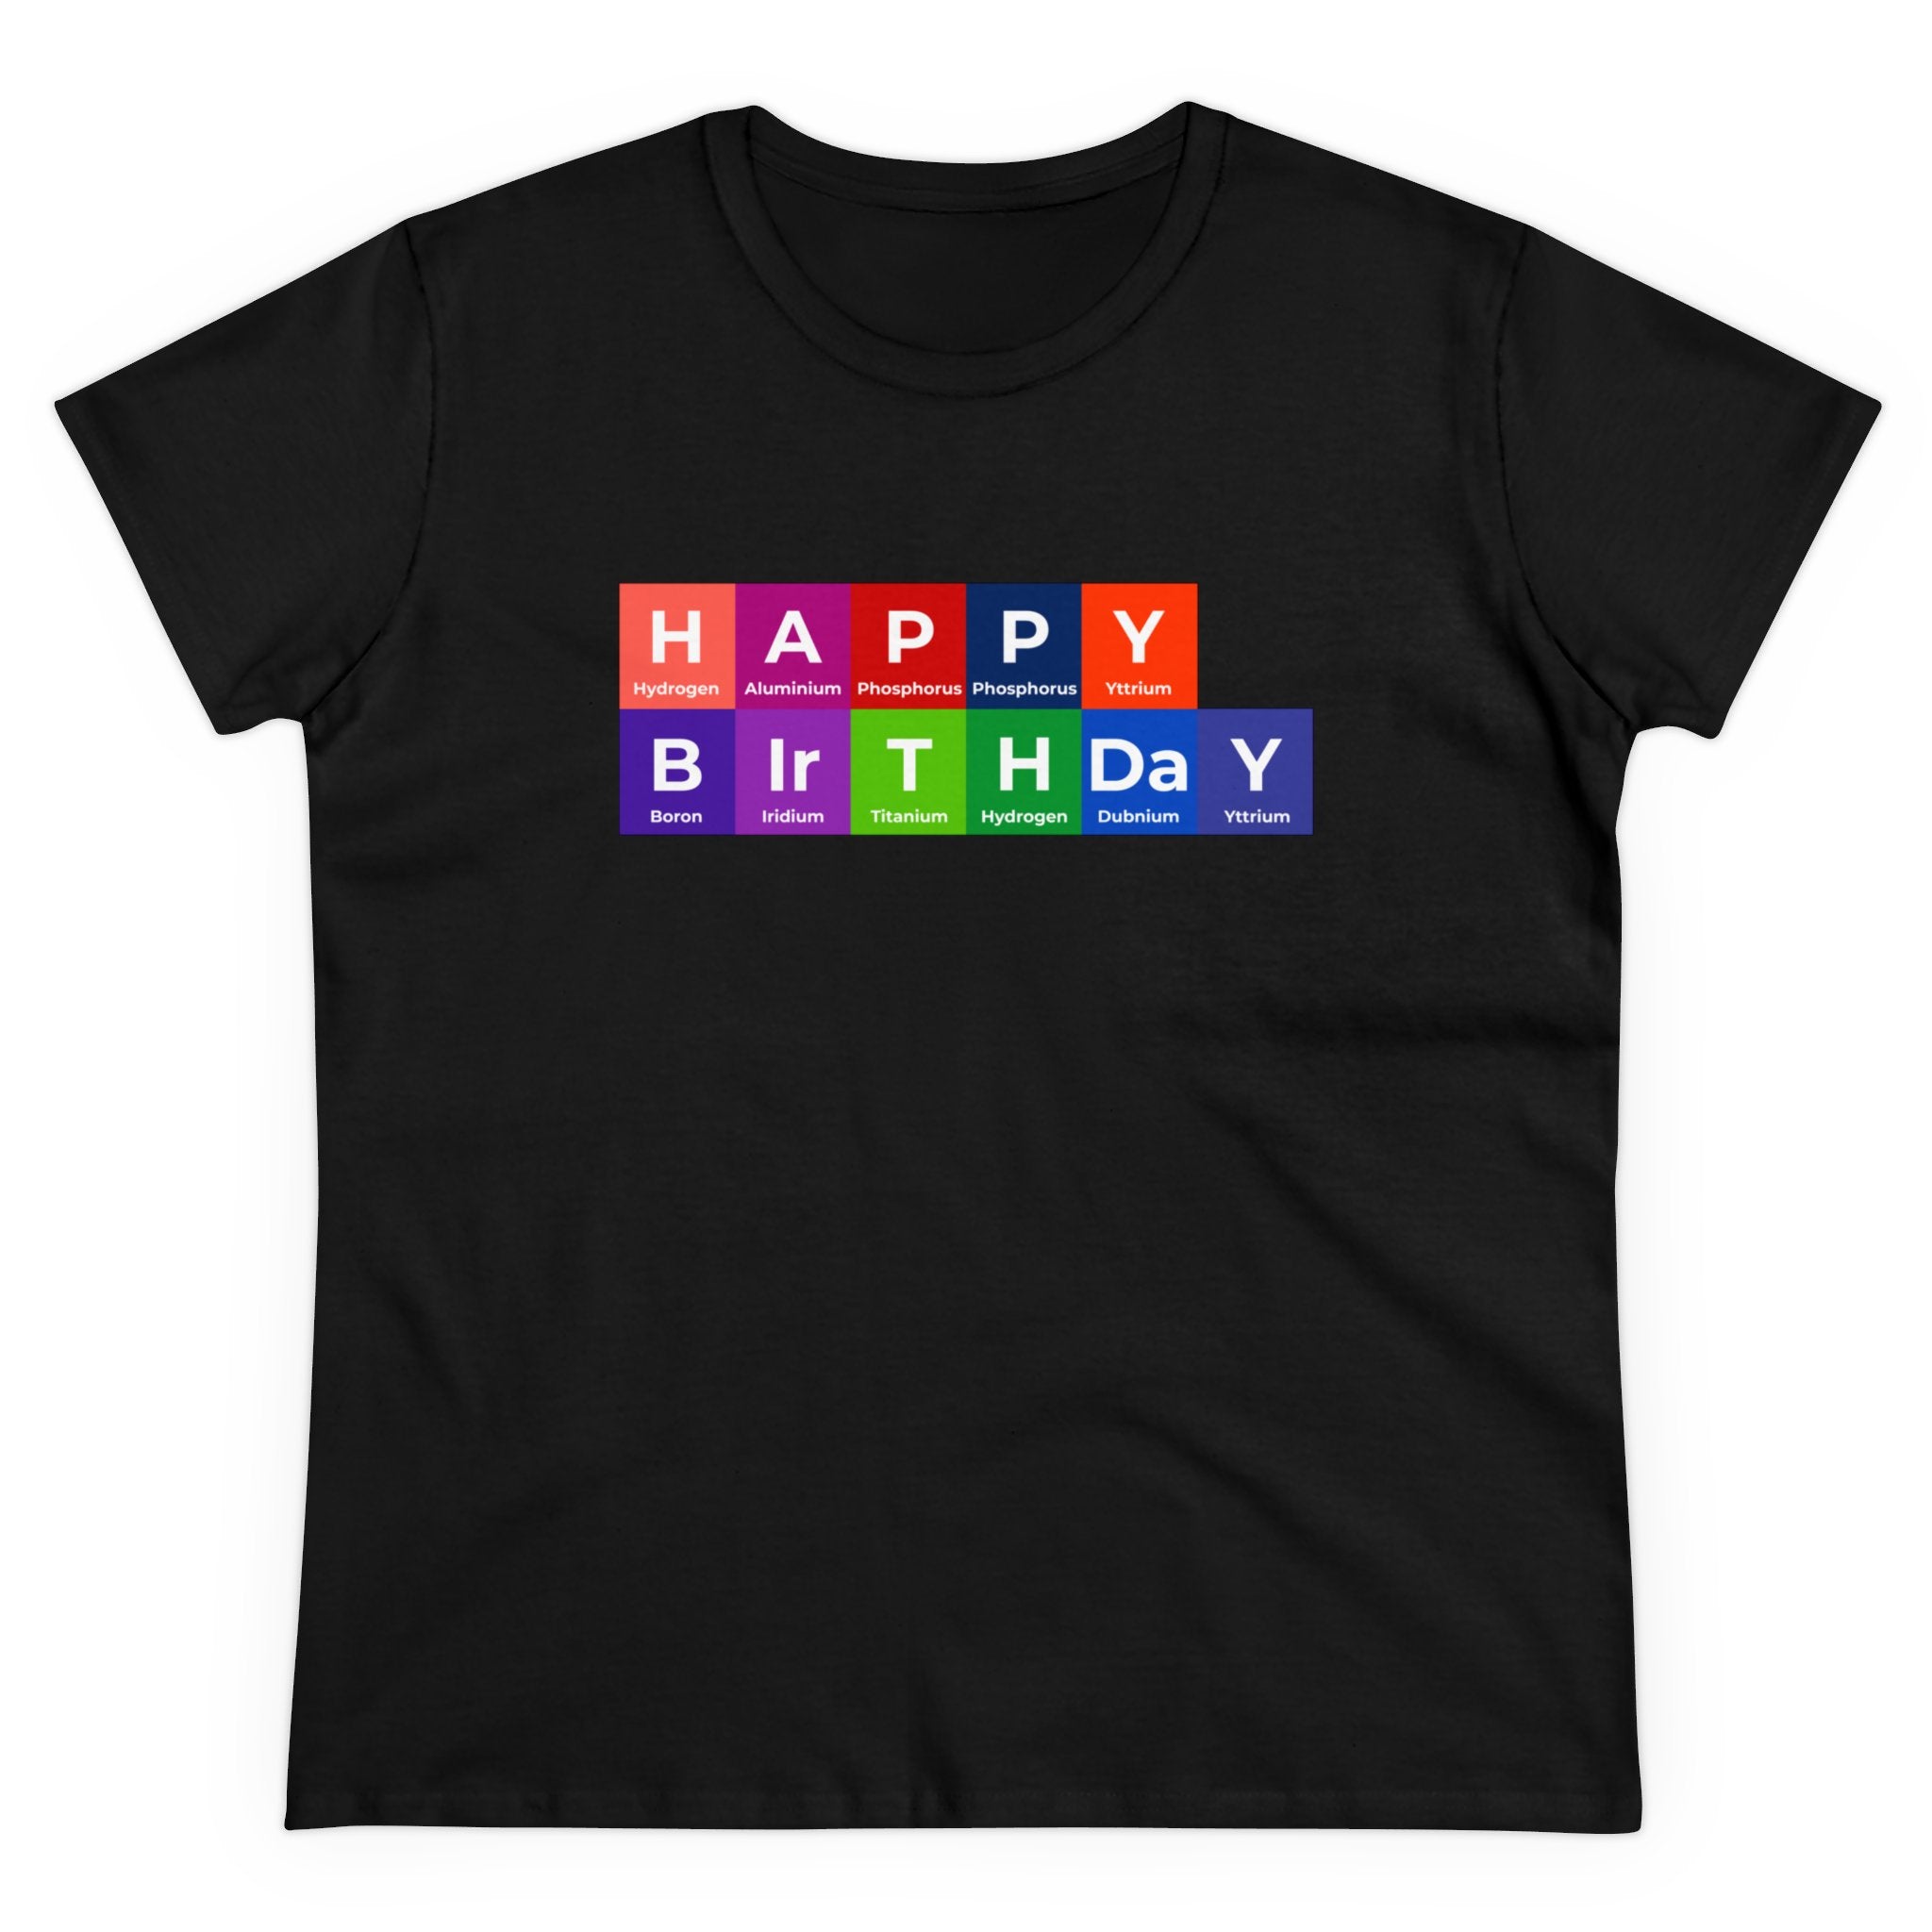 A black Happy Birthday - Women's Tee combines comfort and festivity by featuring the words "Happy Birthday" spelled out using colorful periodic table element symbols.